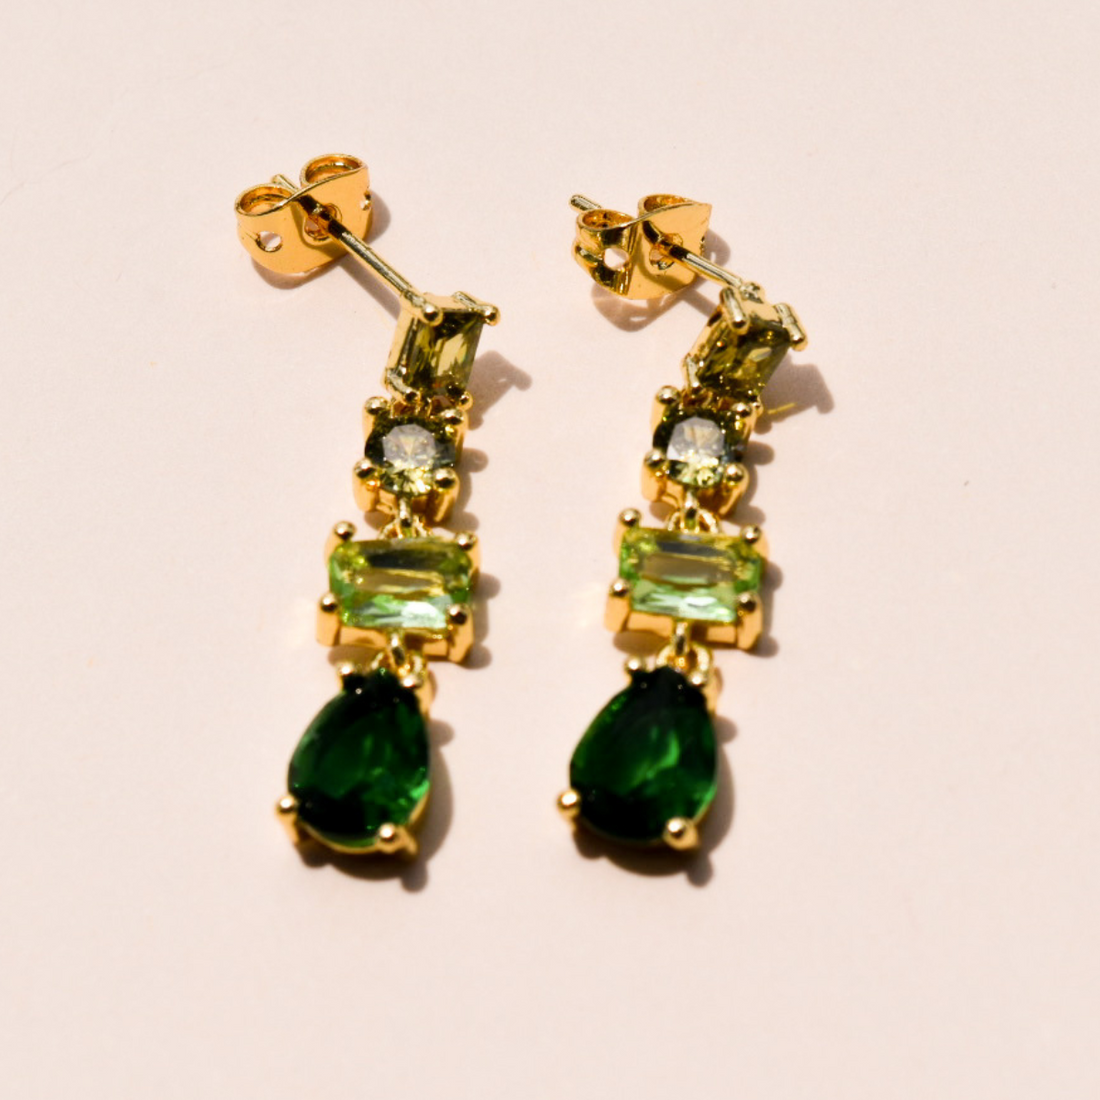 Mcharms Emerald Dream Earrings Shop Jewelry at MCHARMS